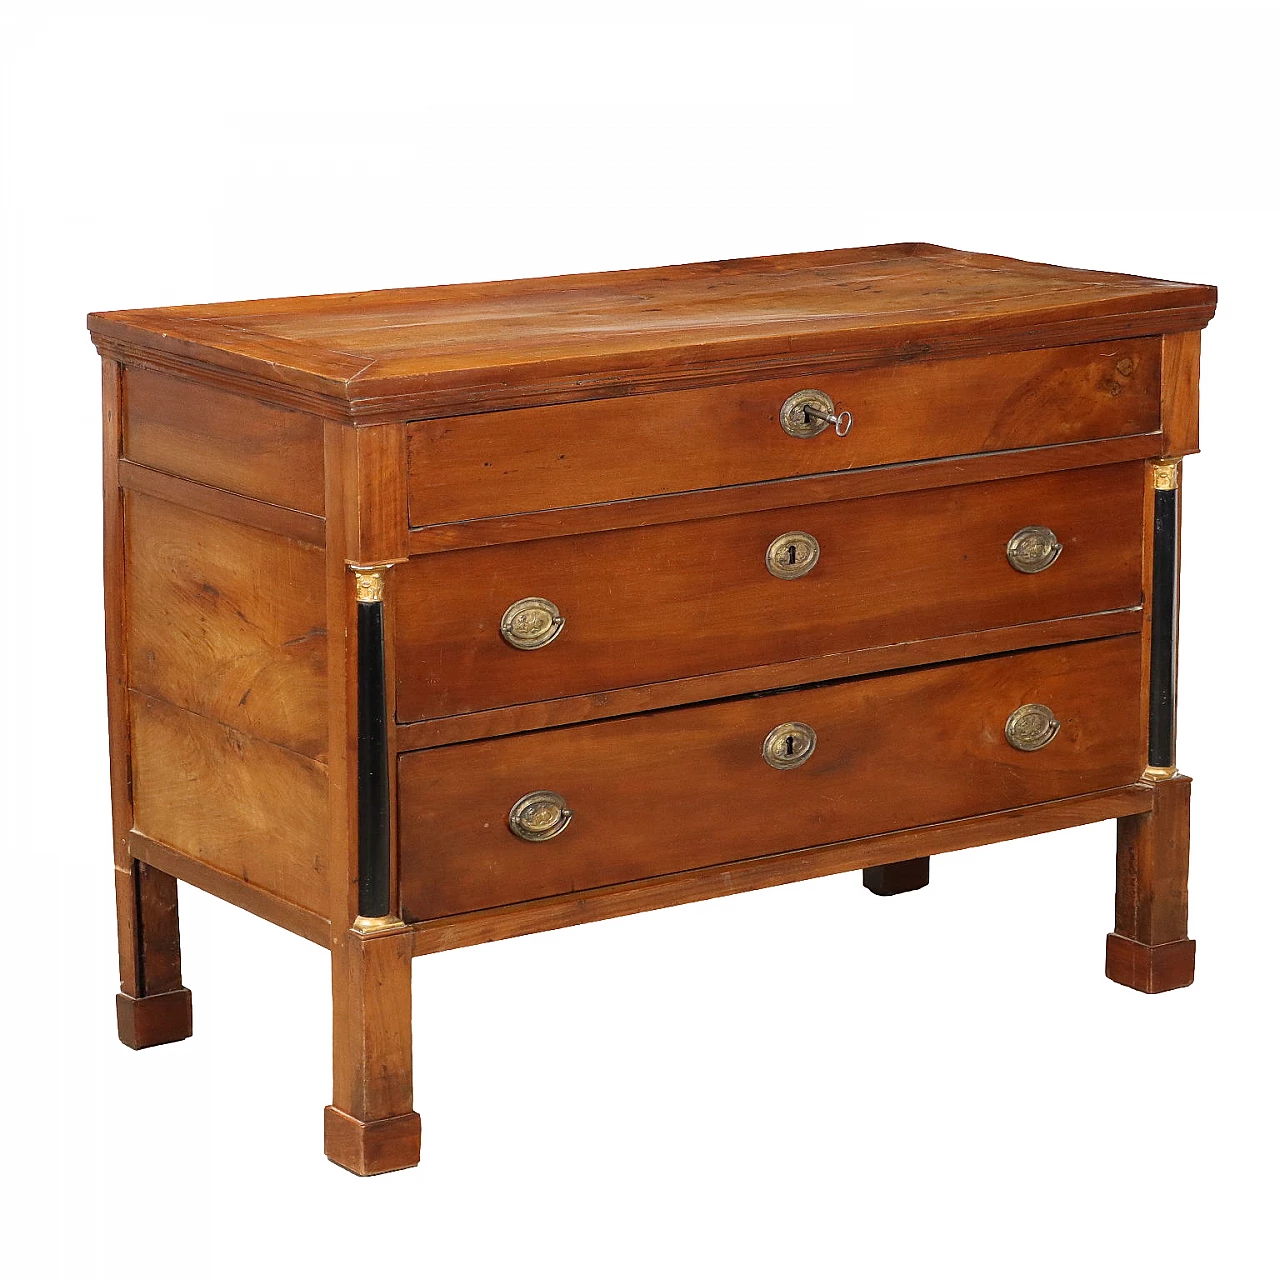 Walnut and fir chest of drawers with plinth feet, 19th century 1